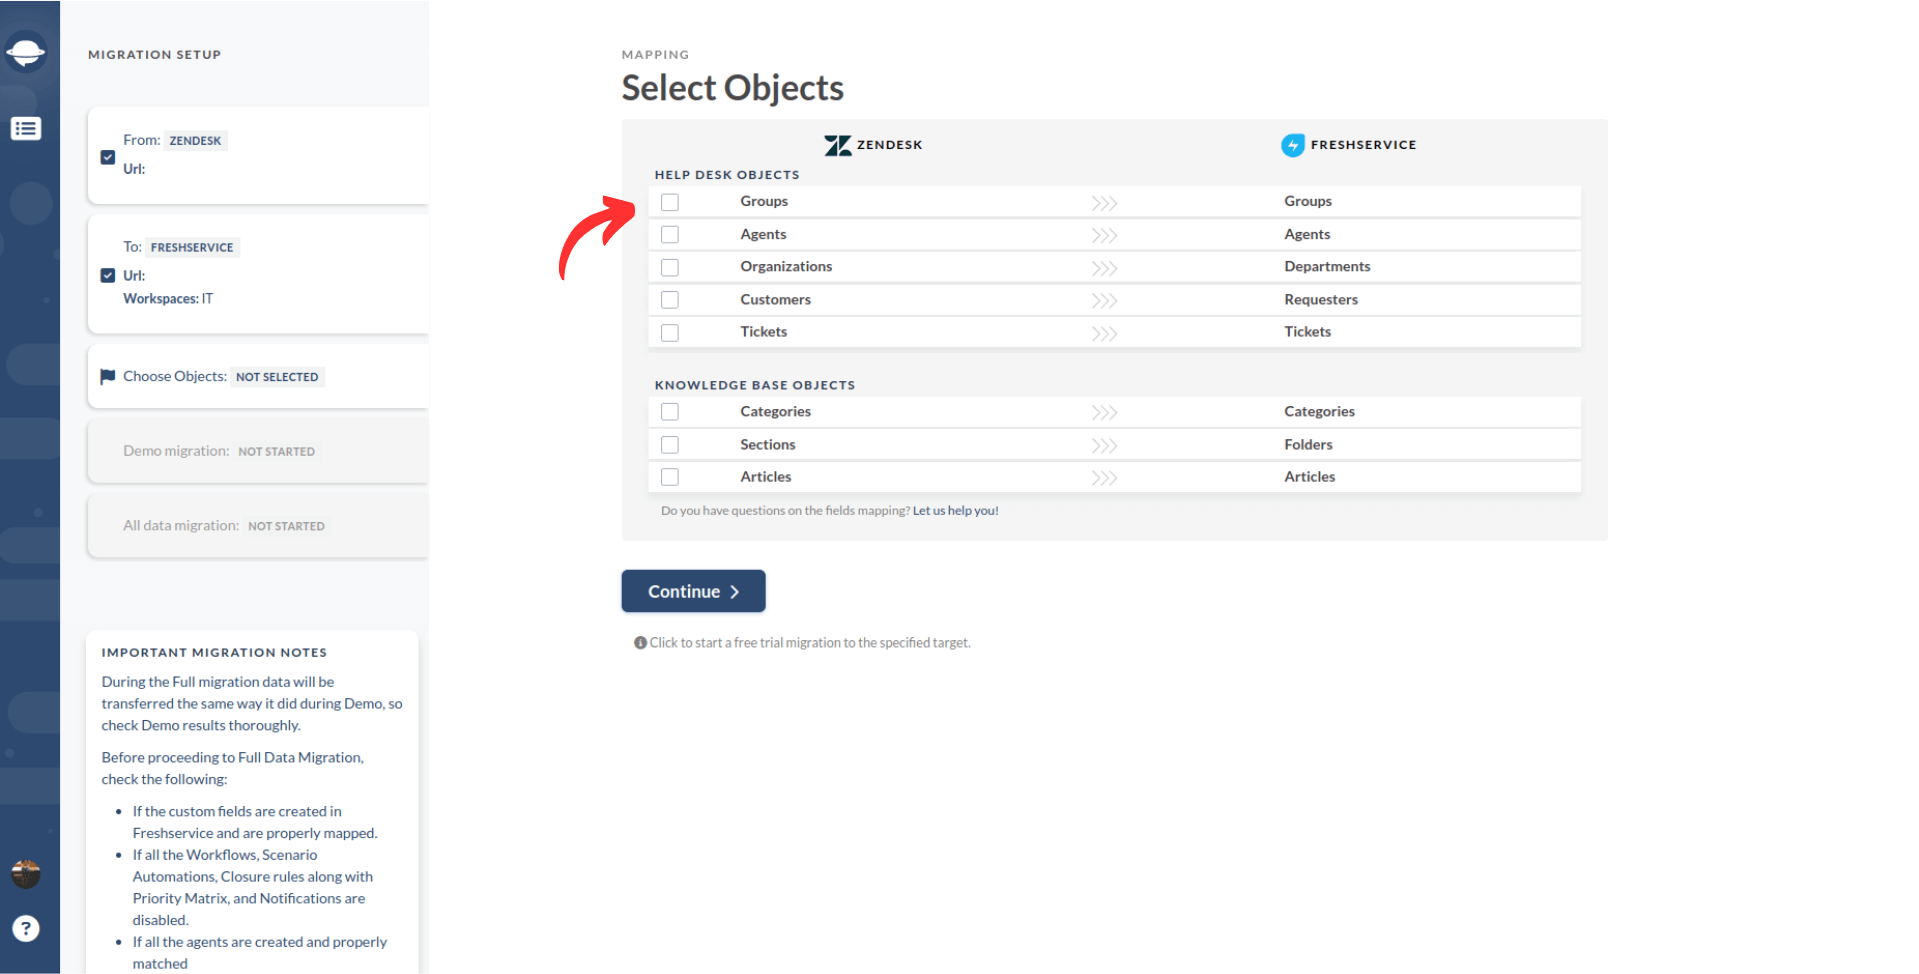 Zendesk to Freshservice_Select Objects_Workspace